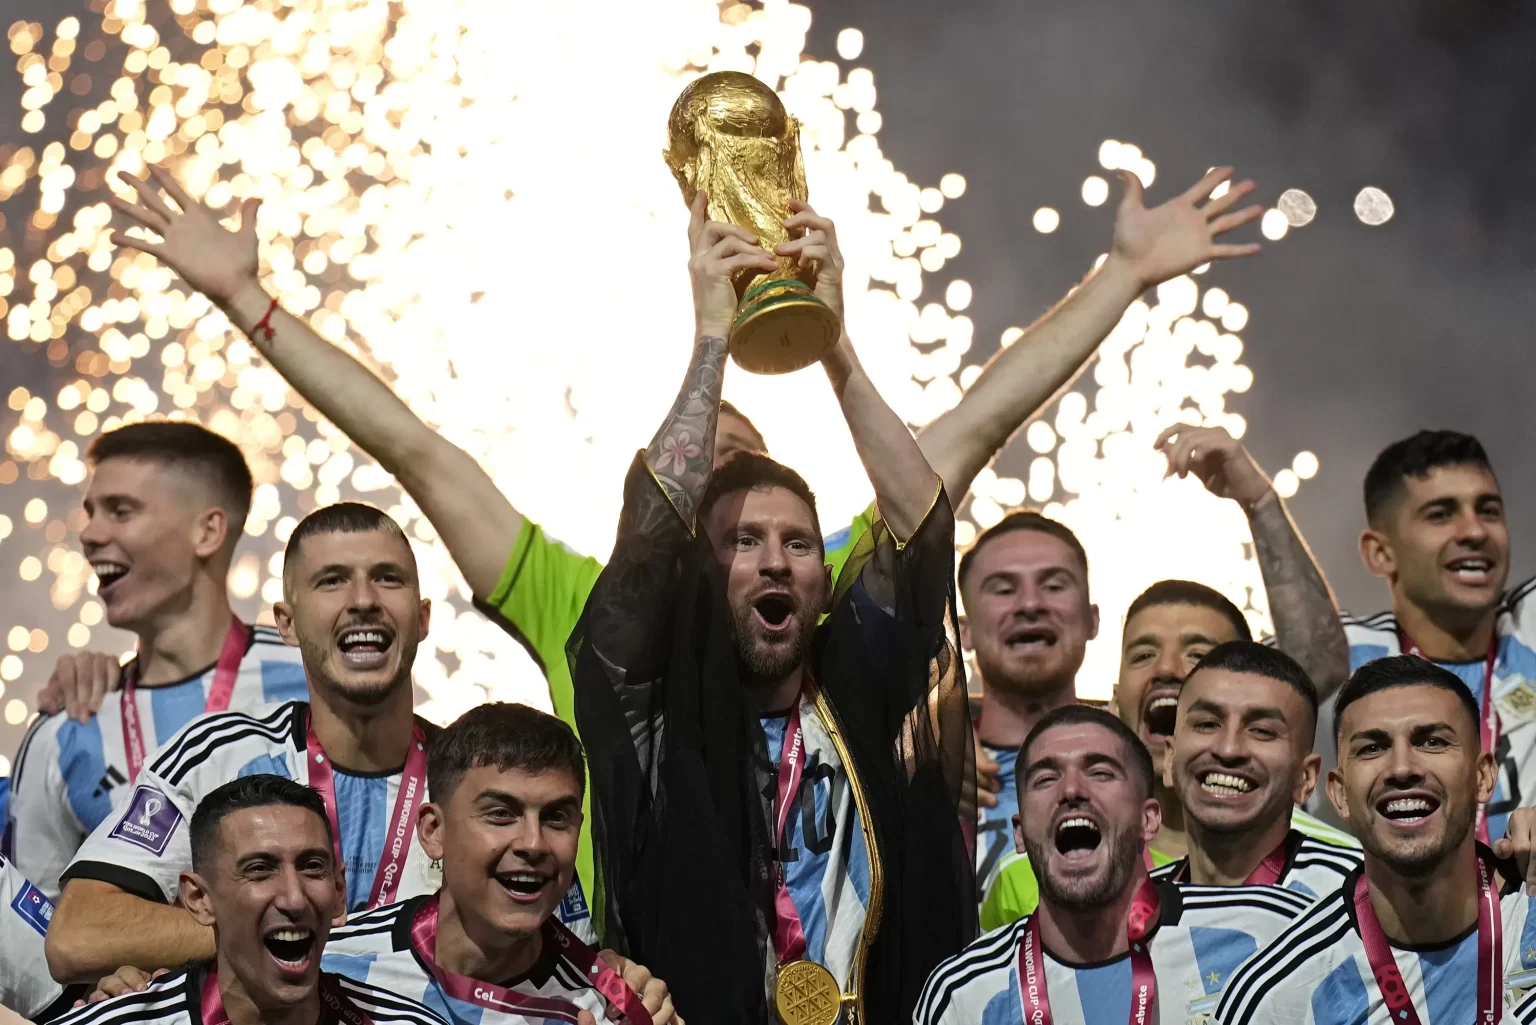 Qatar World Cup 2022 – Argentina win the World Cup, beating France on penalties 